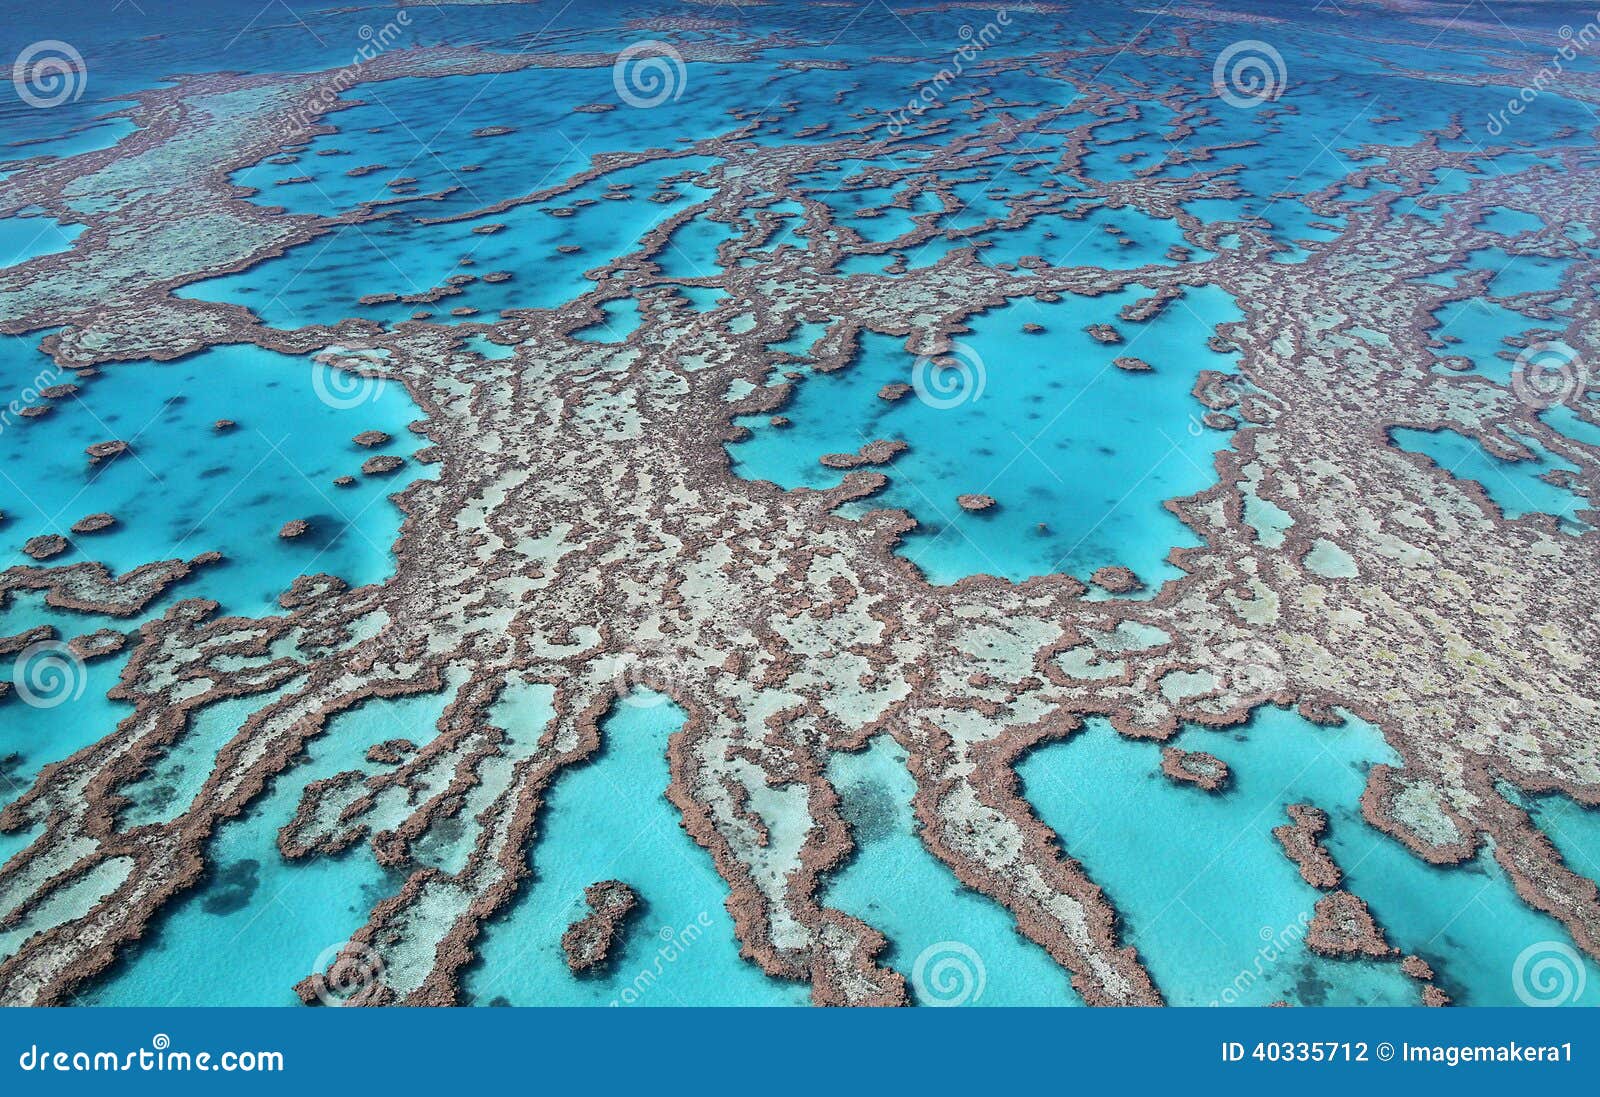 great barrier reef colours